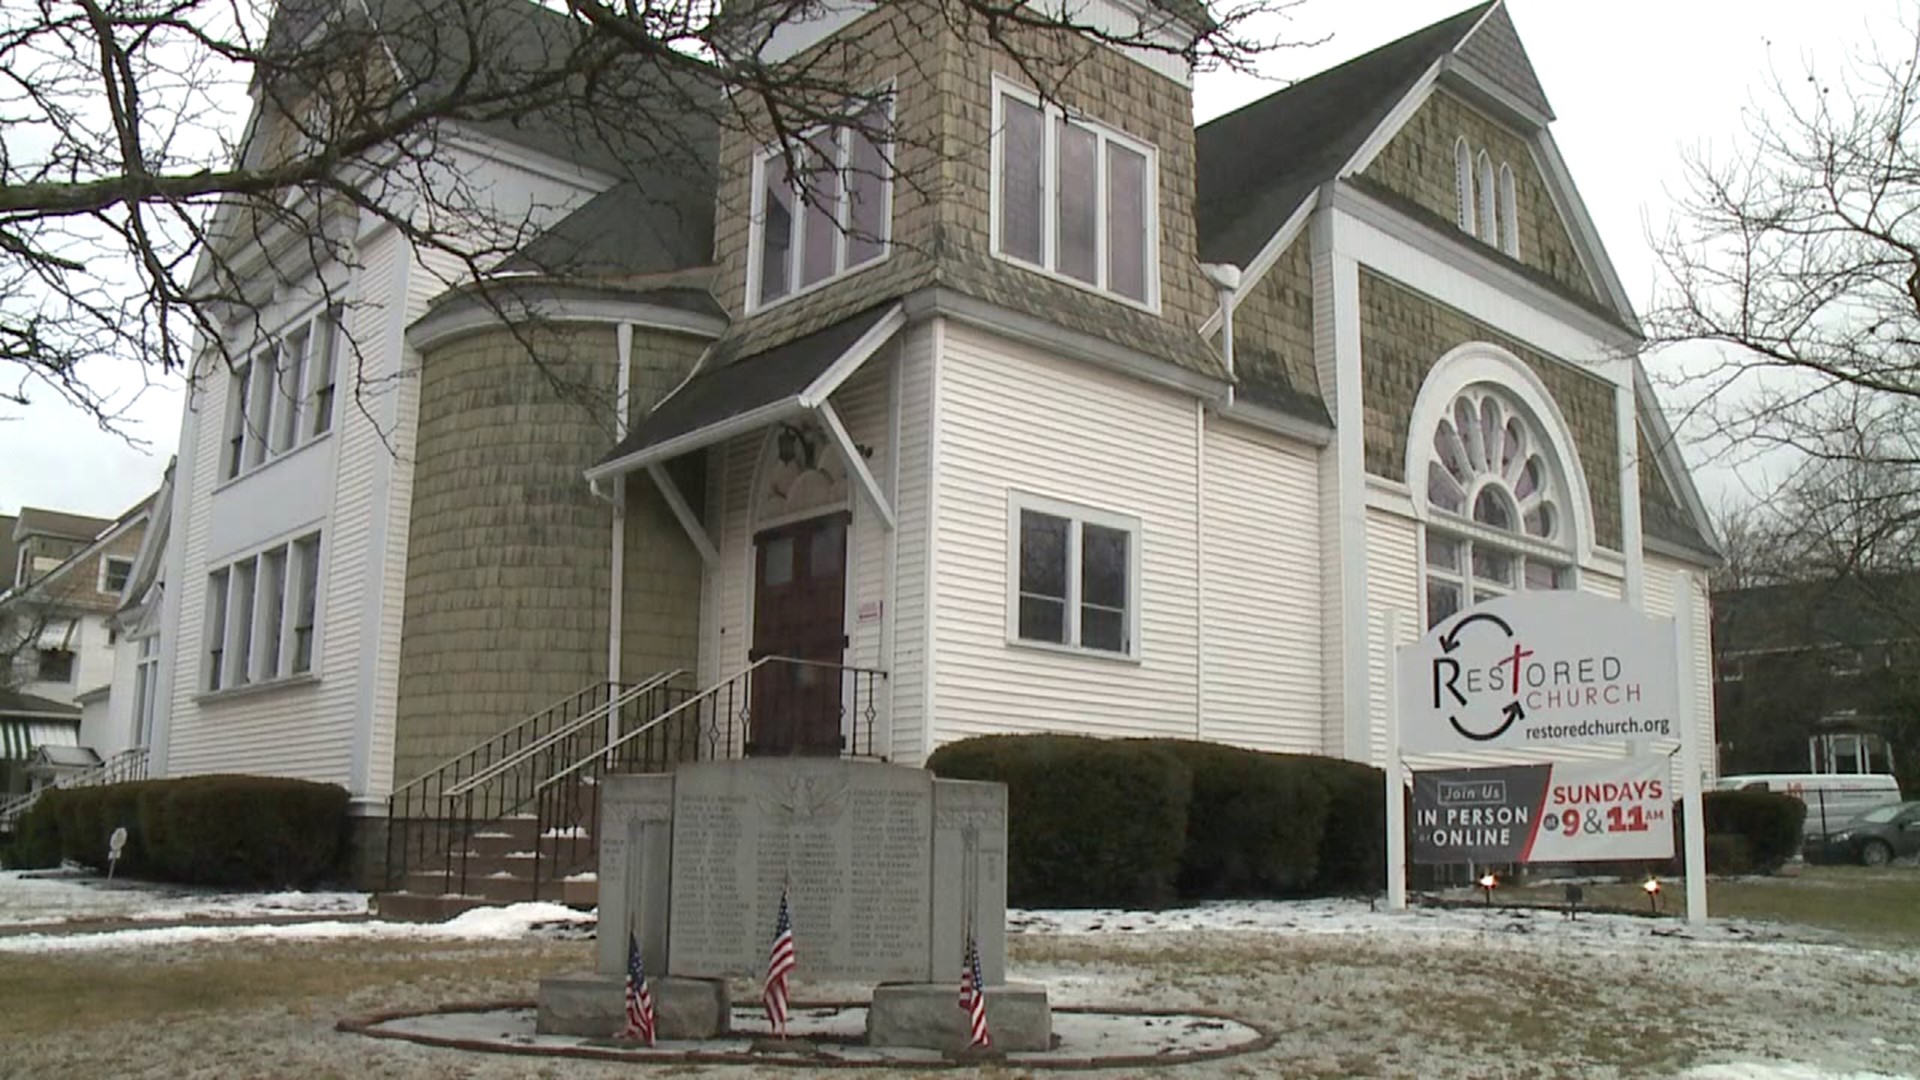 A church is now opening its doors to those affected by a fire late last month in Wilkes-Barre that left more than 120 people without a place to stay.